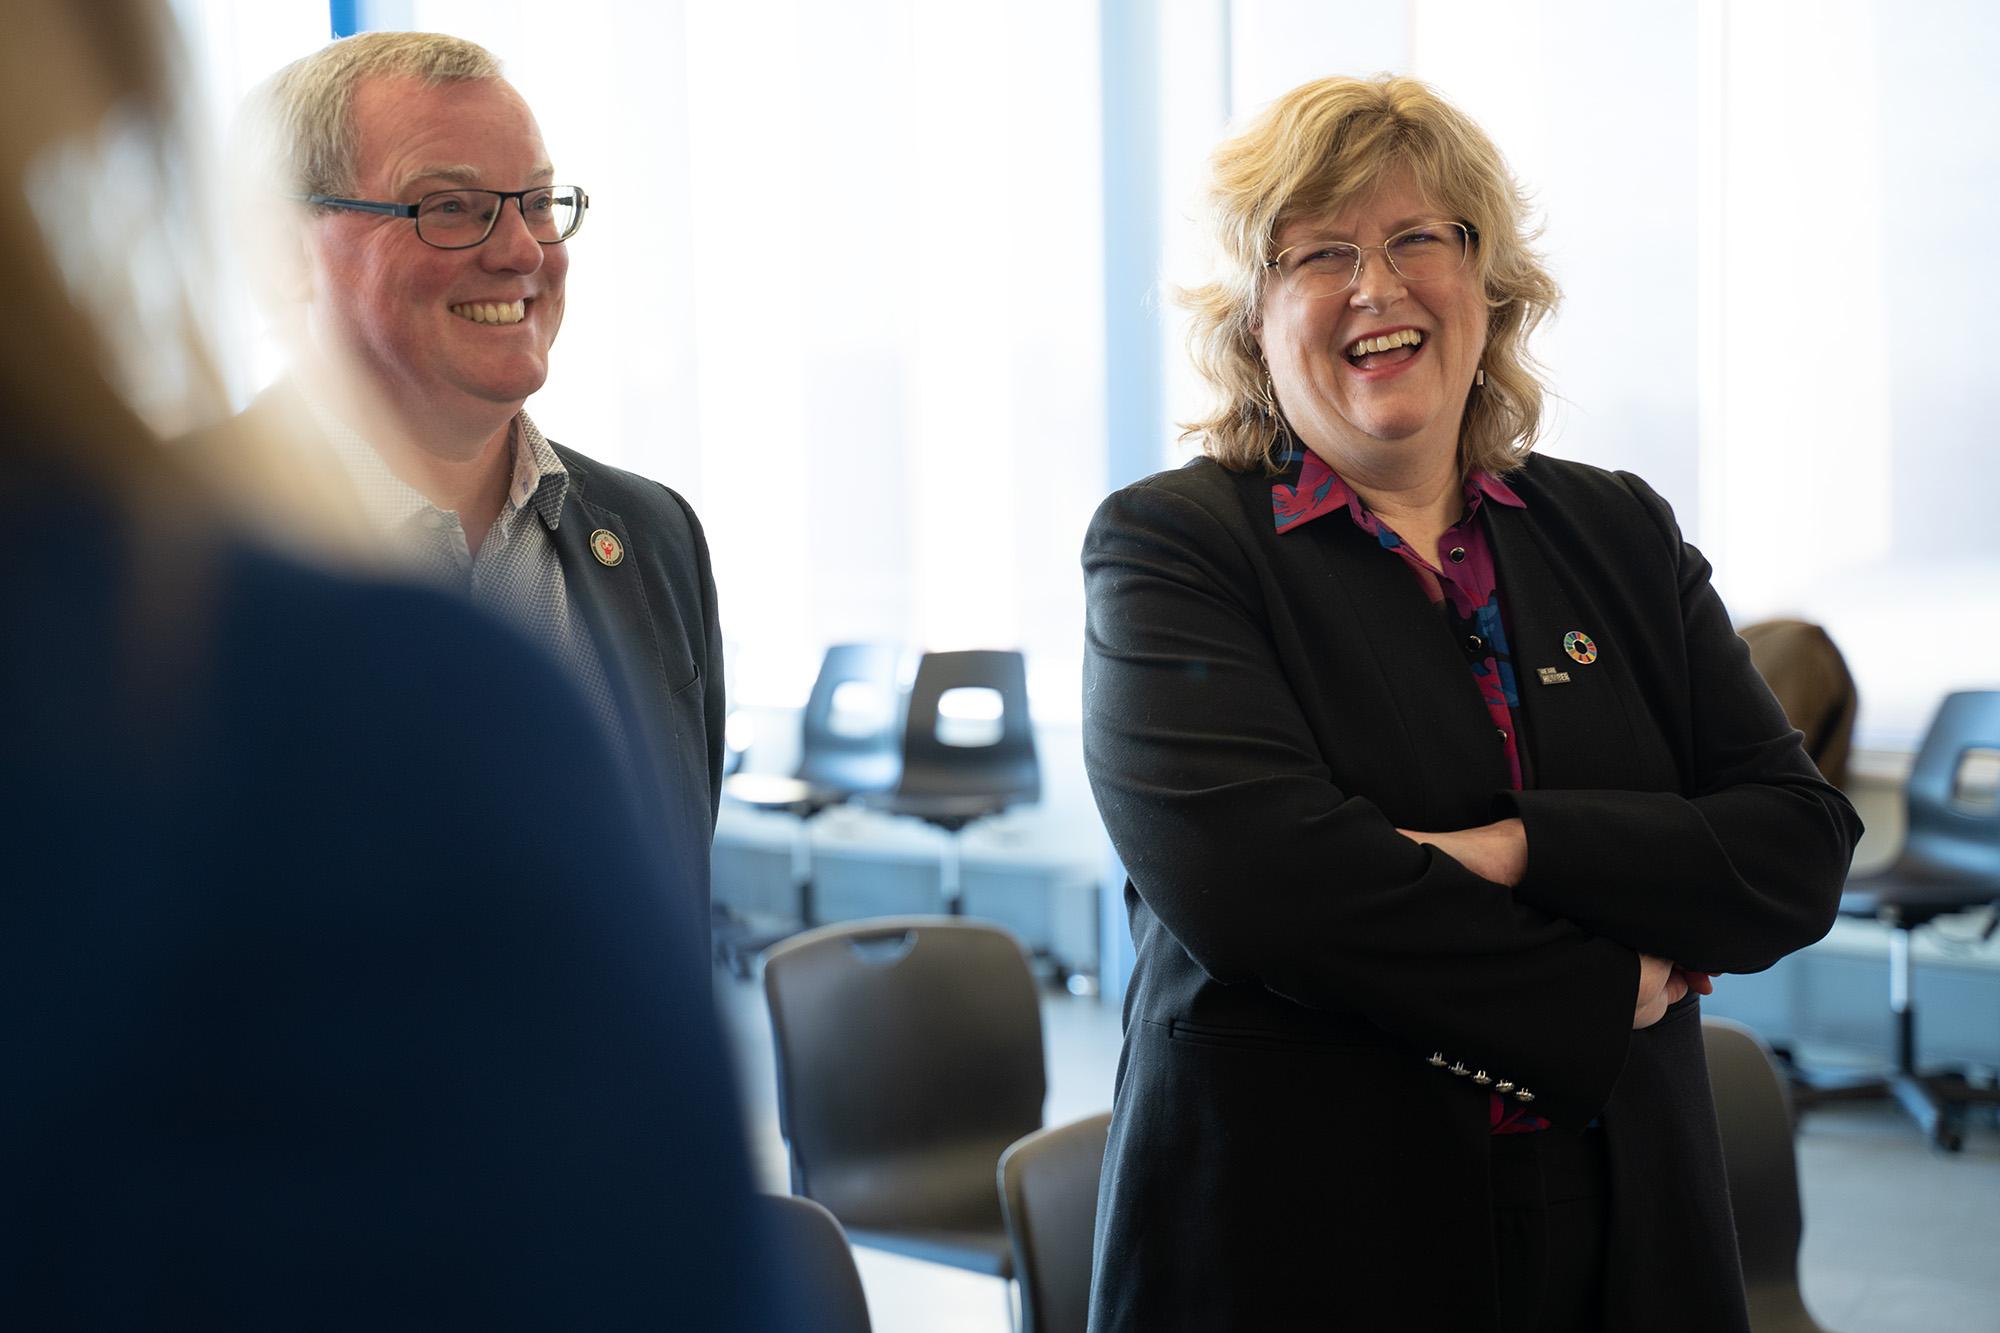 Humber College President and CEO Dr. Ann Marie Vaughan smiles and laughs.